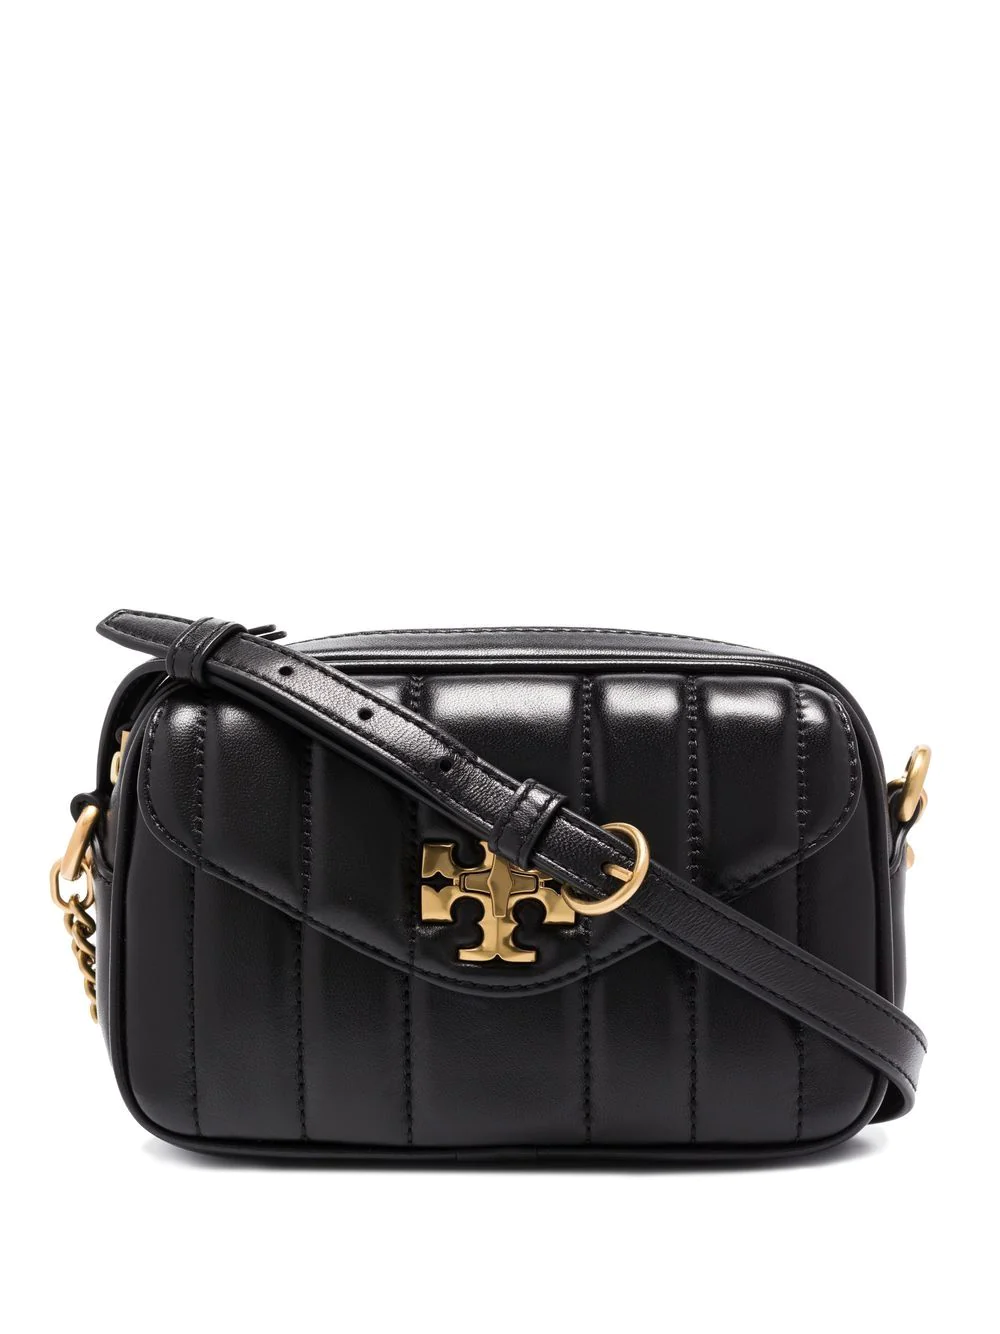 Tory Burch Kira Quilted Leather Bag: Handbags